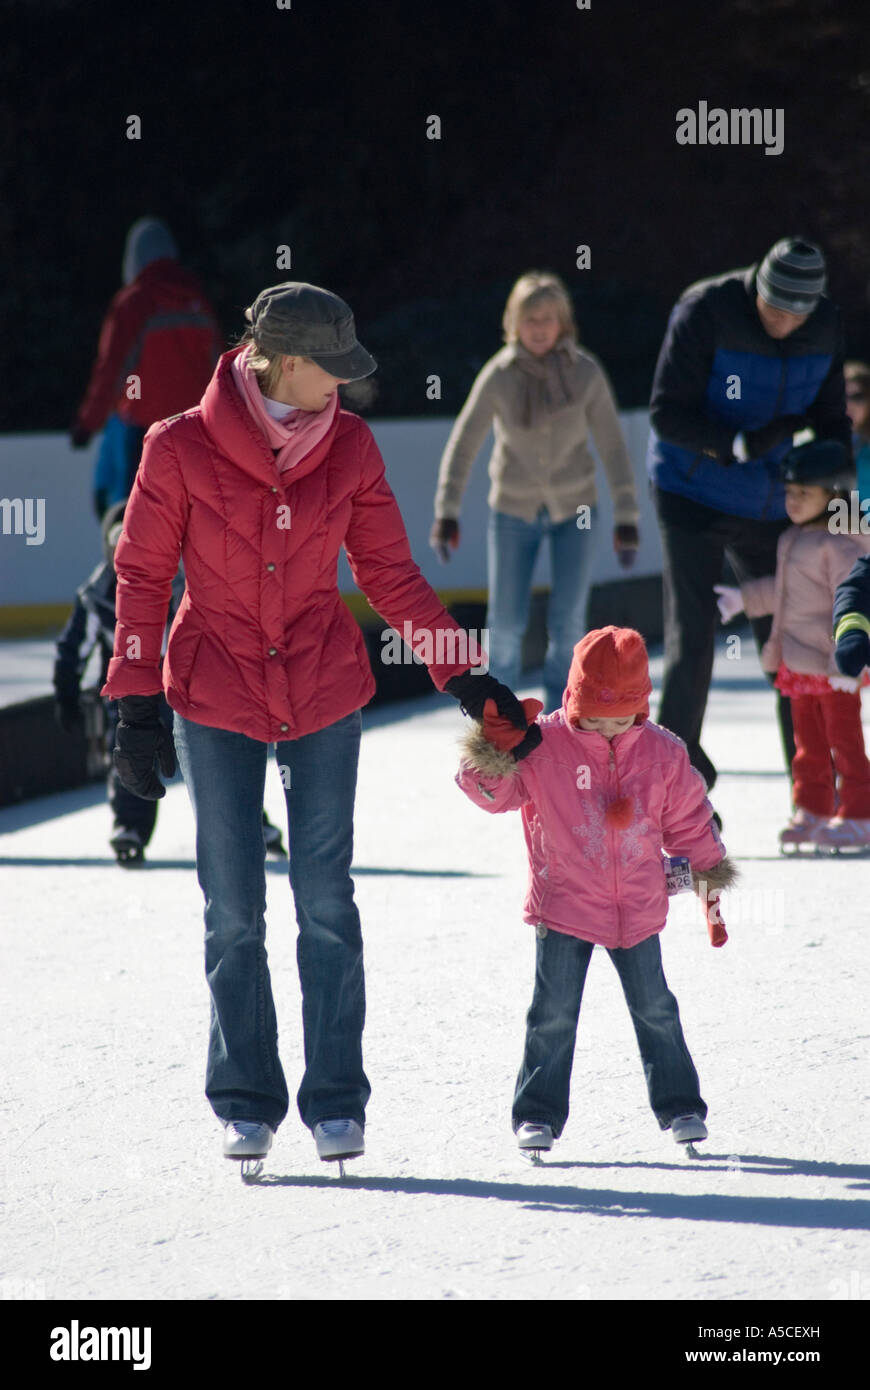 Mother and Daughter Ice Skating at Wollman Rink in Central Park Stock Photo